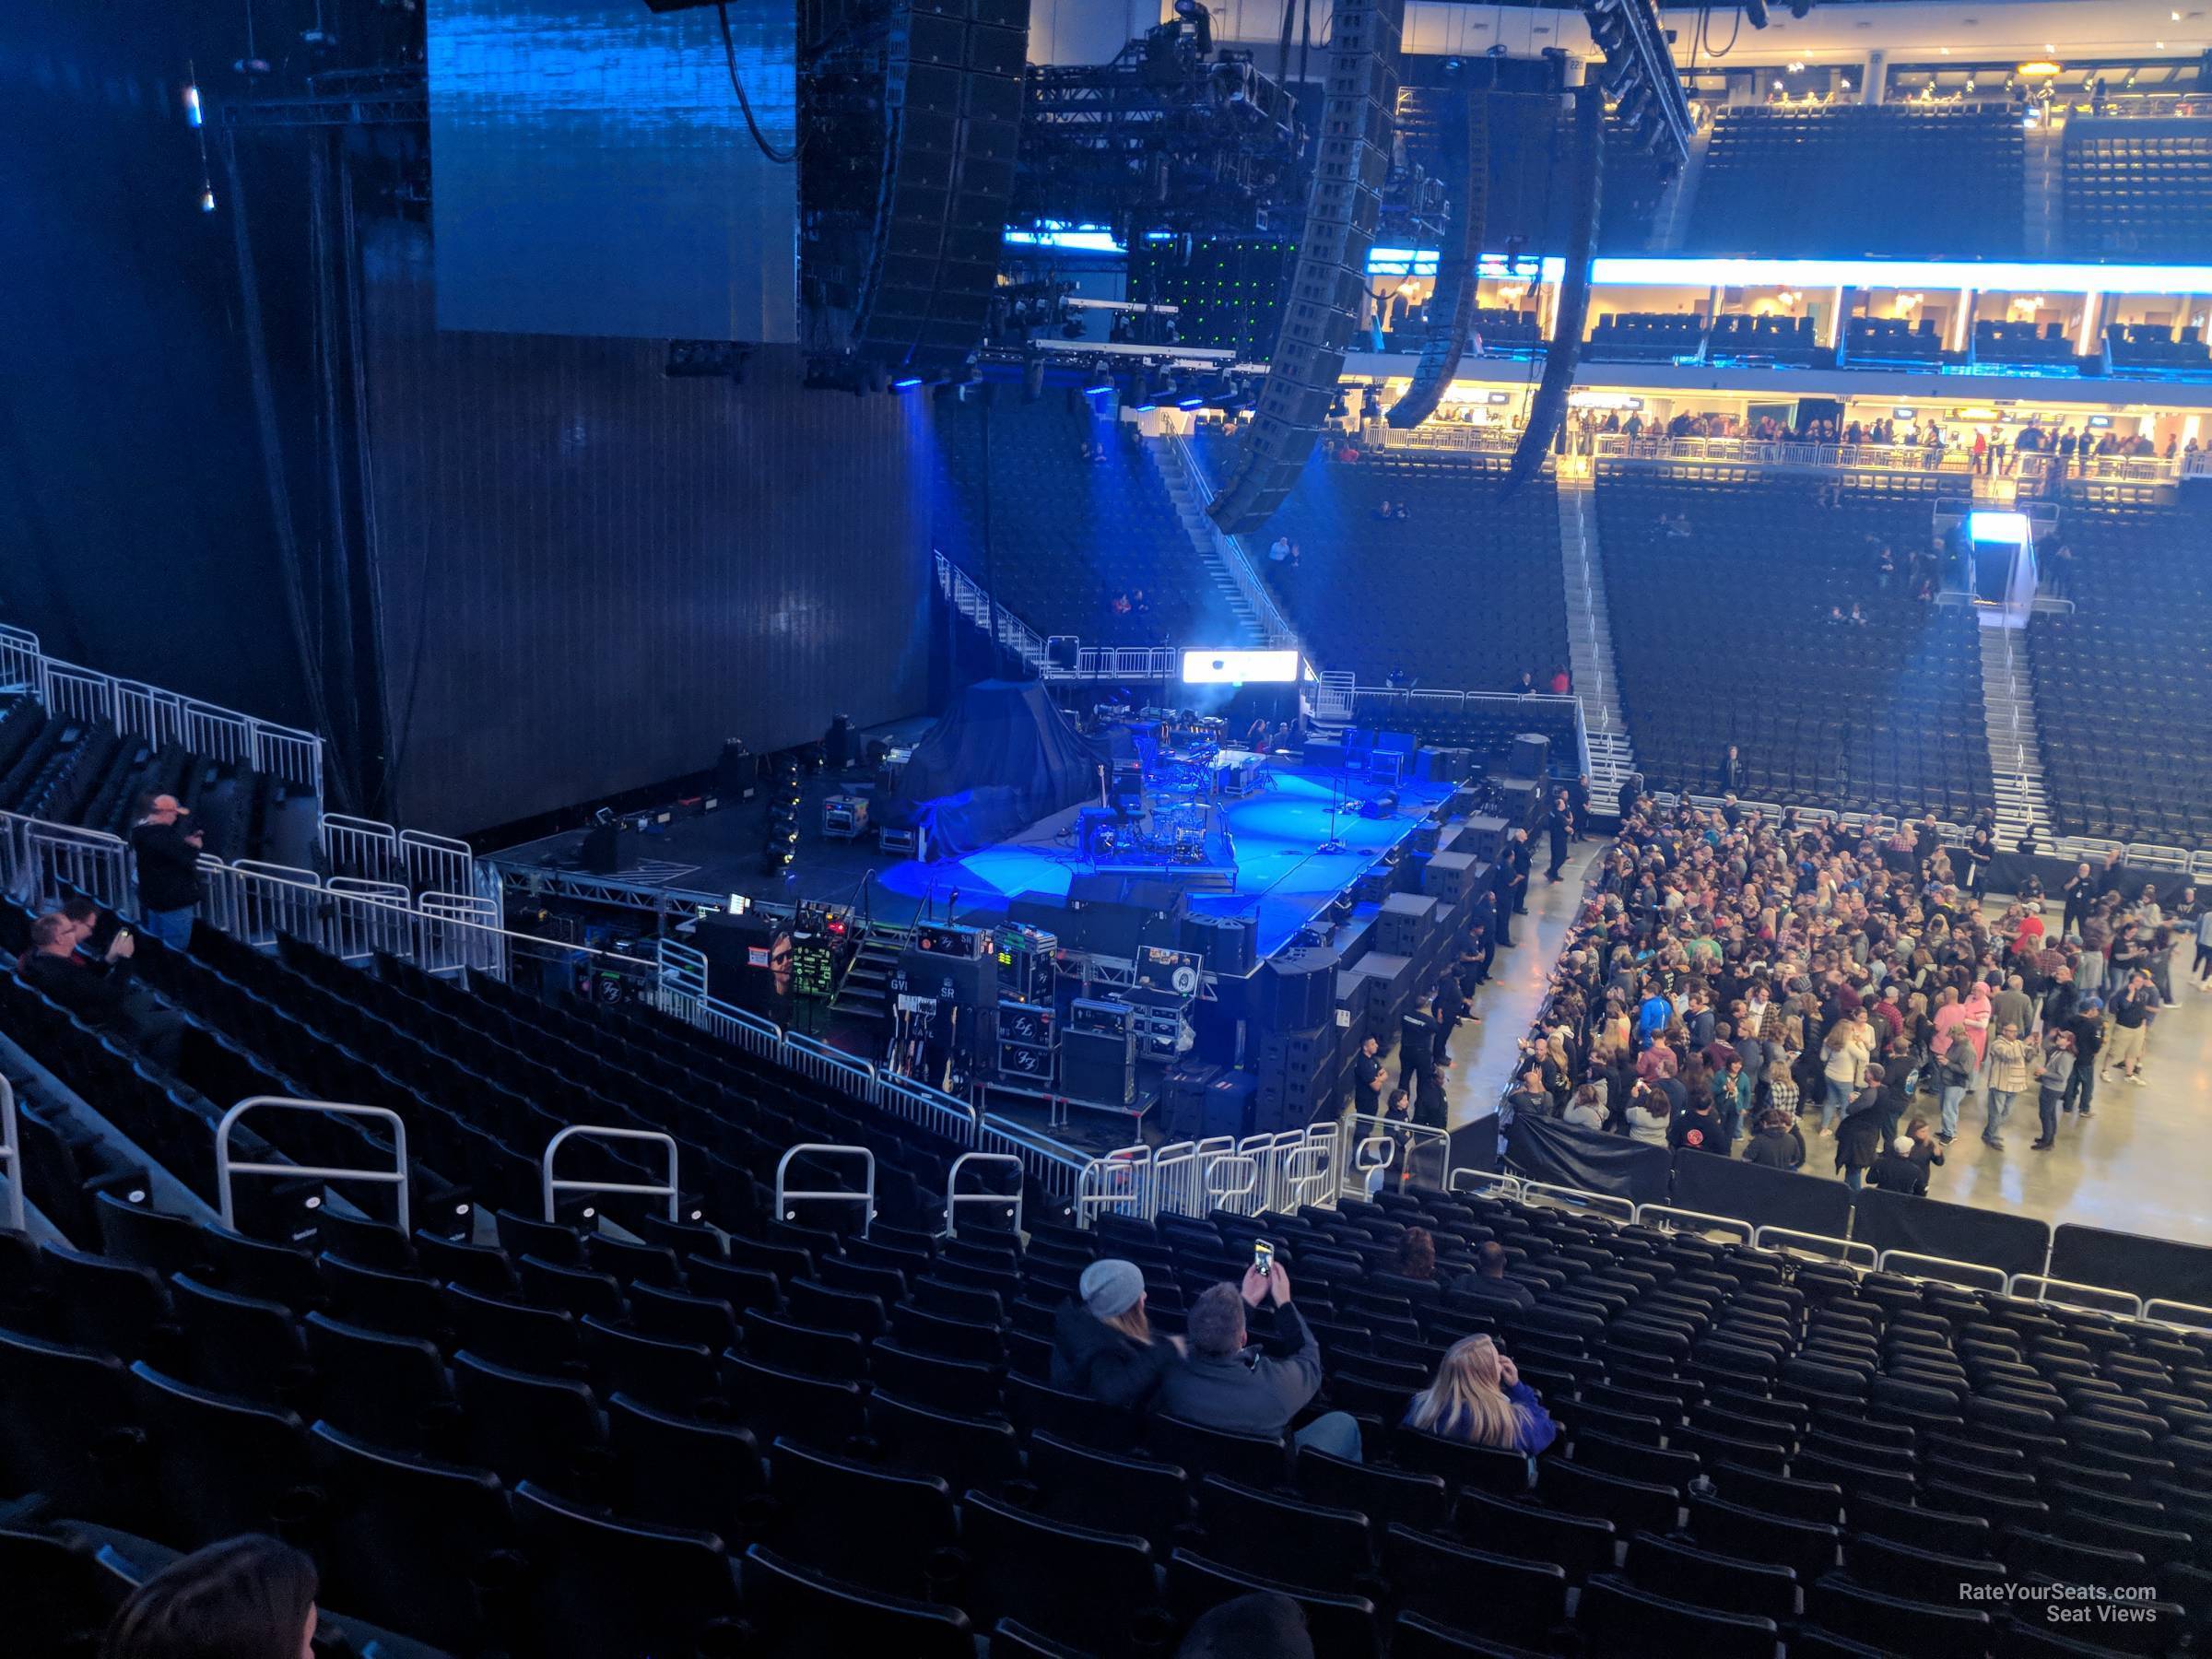 section 107, row 23 seat view  for concert - fiserv forum